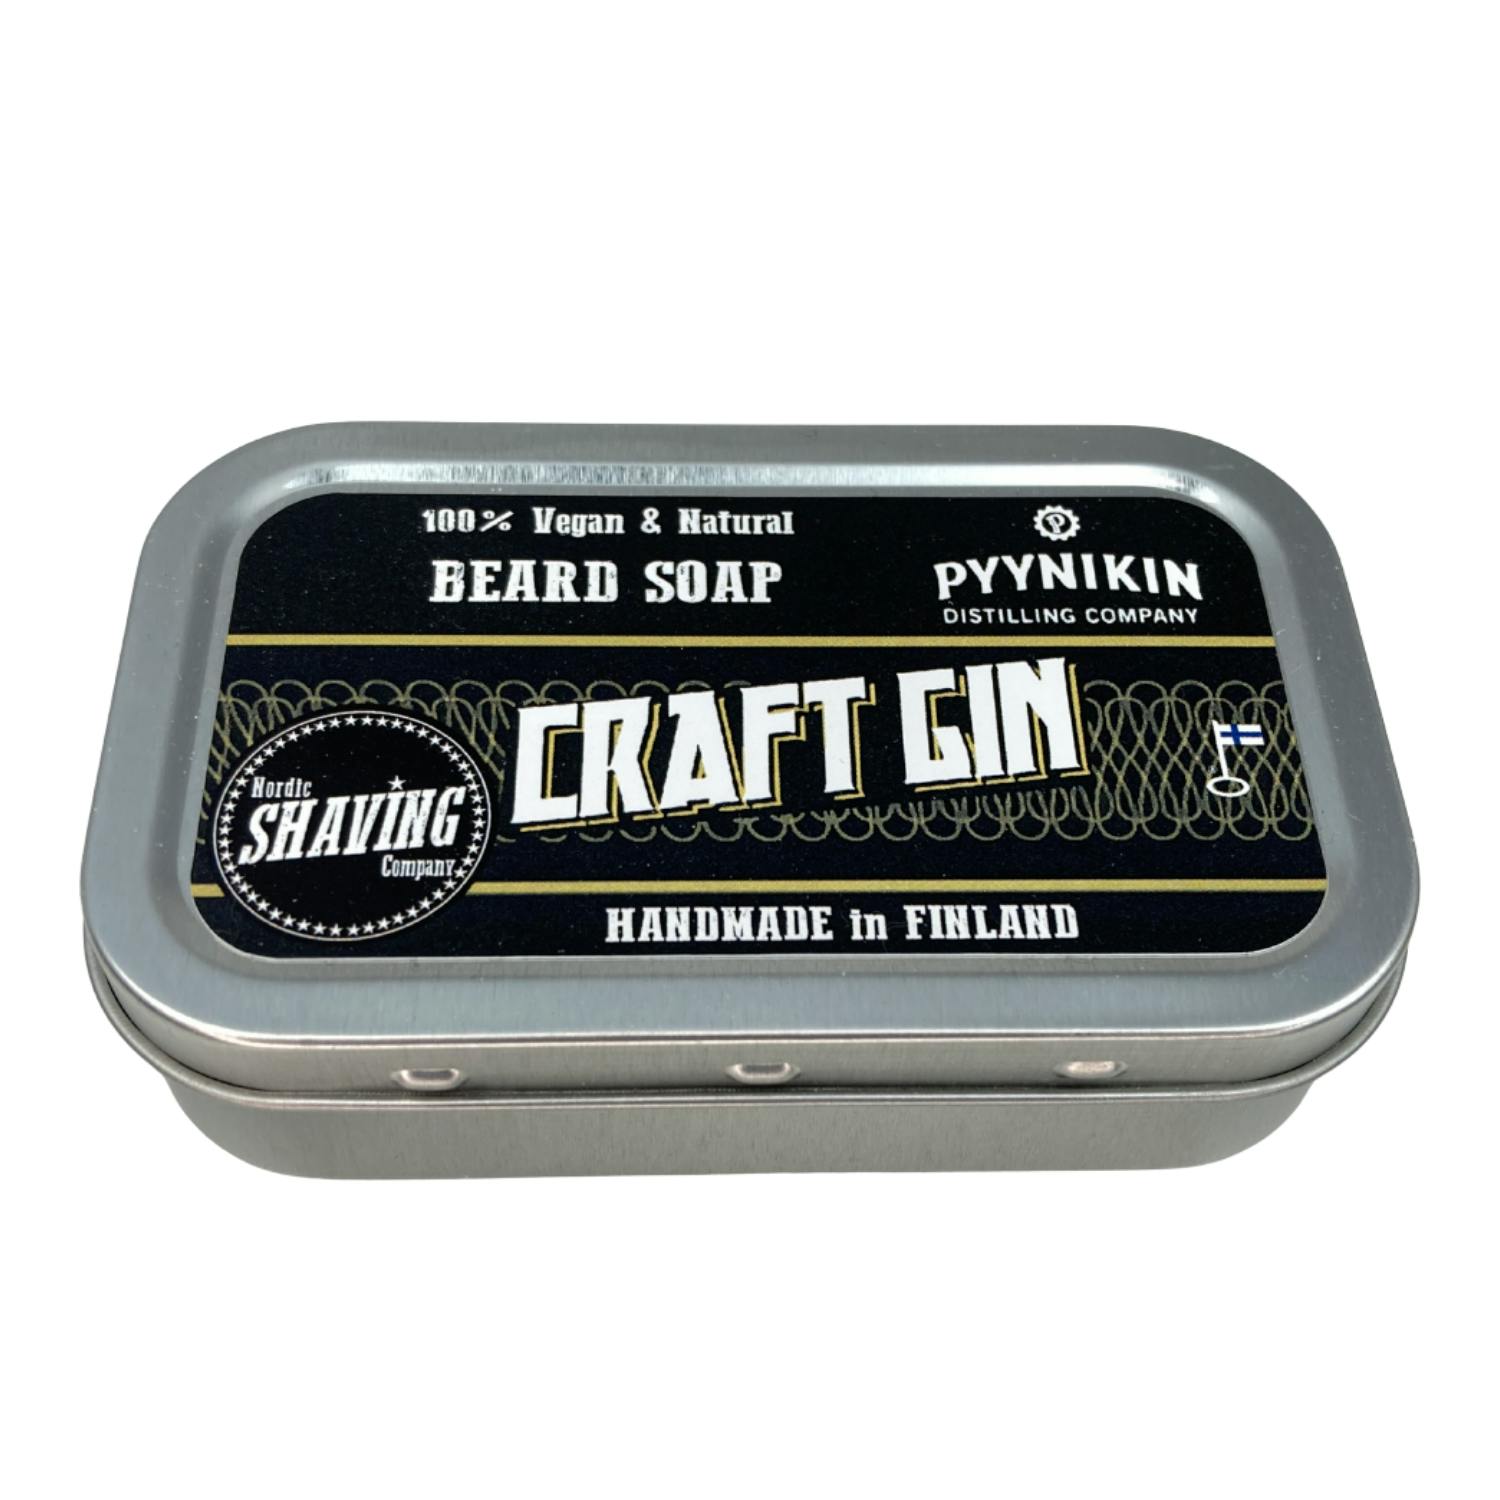 Retro tin of beard soap with a natural scent of craft gin botanicals. An unusual gift for men